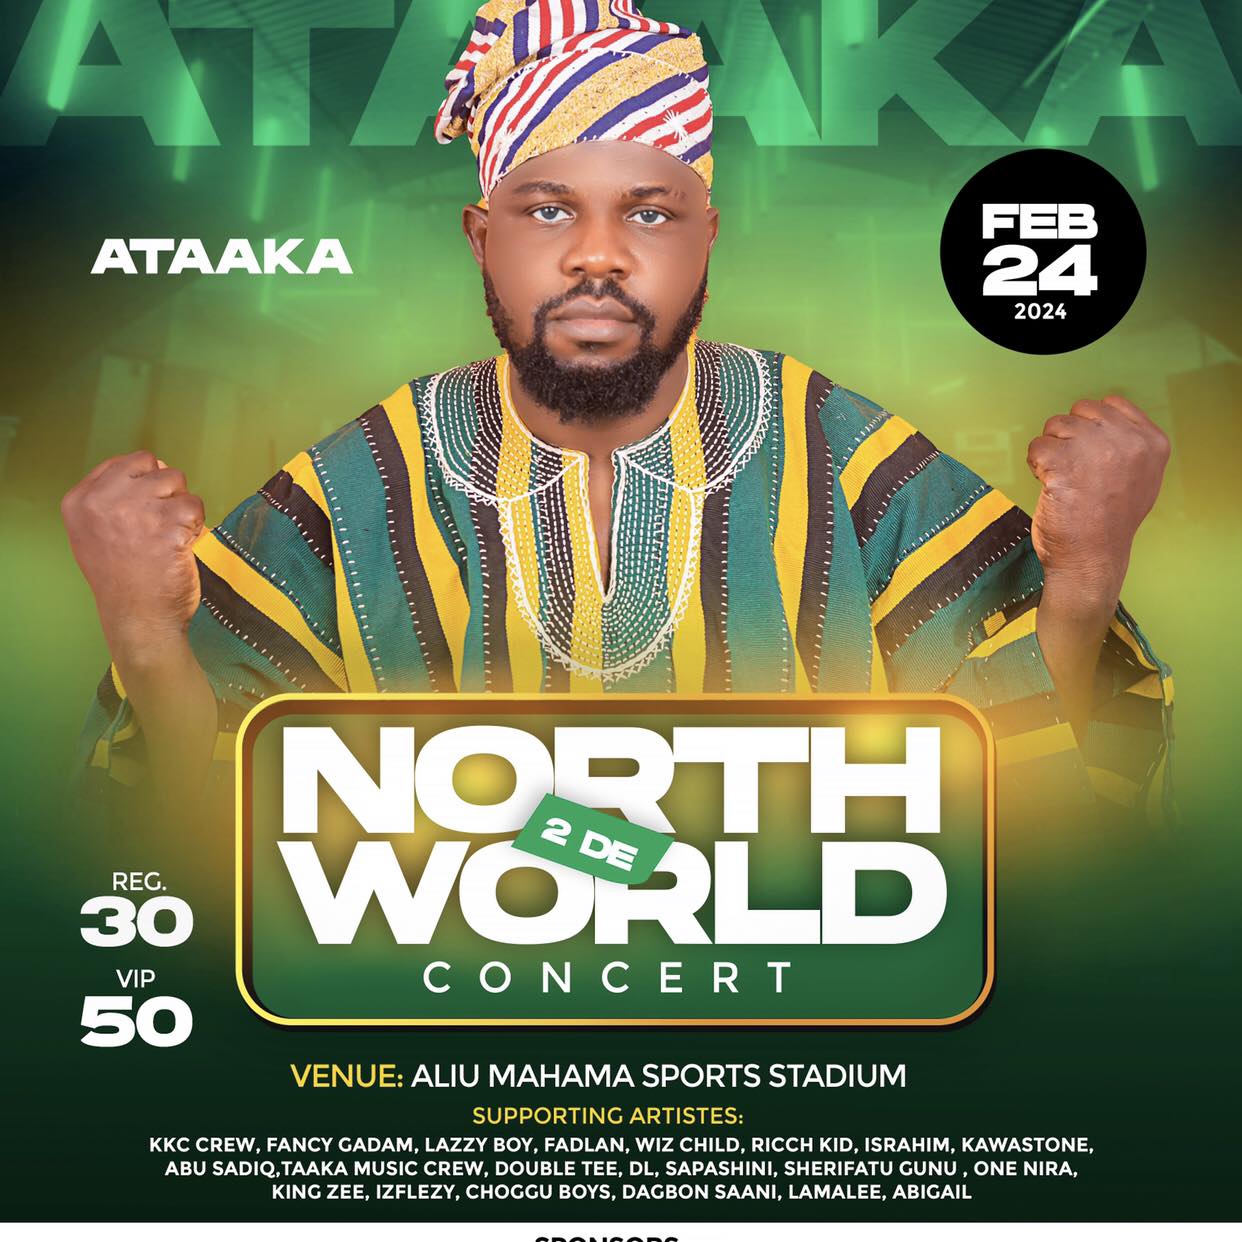 Social Media User Rated Ataaka's (N2DW) Concert Which Goes Viral